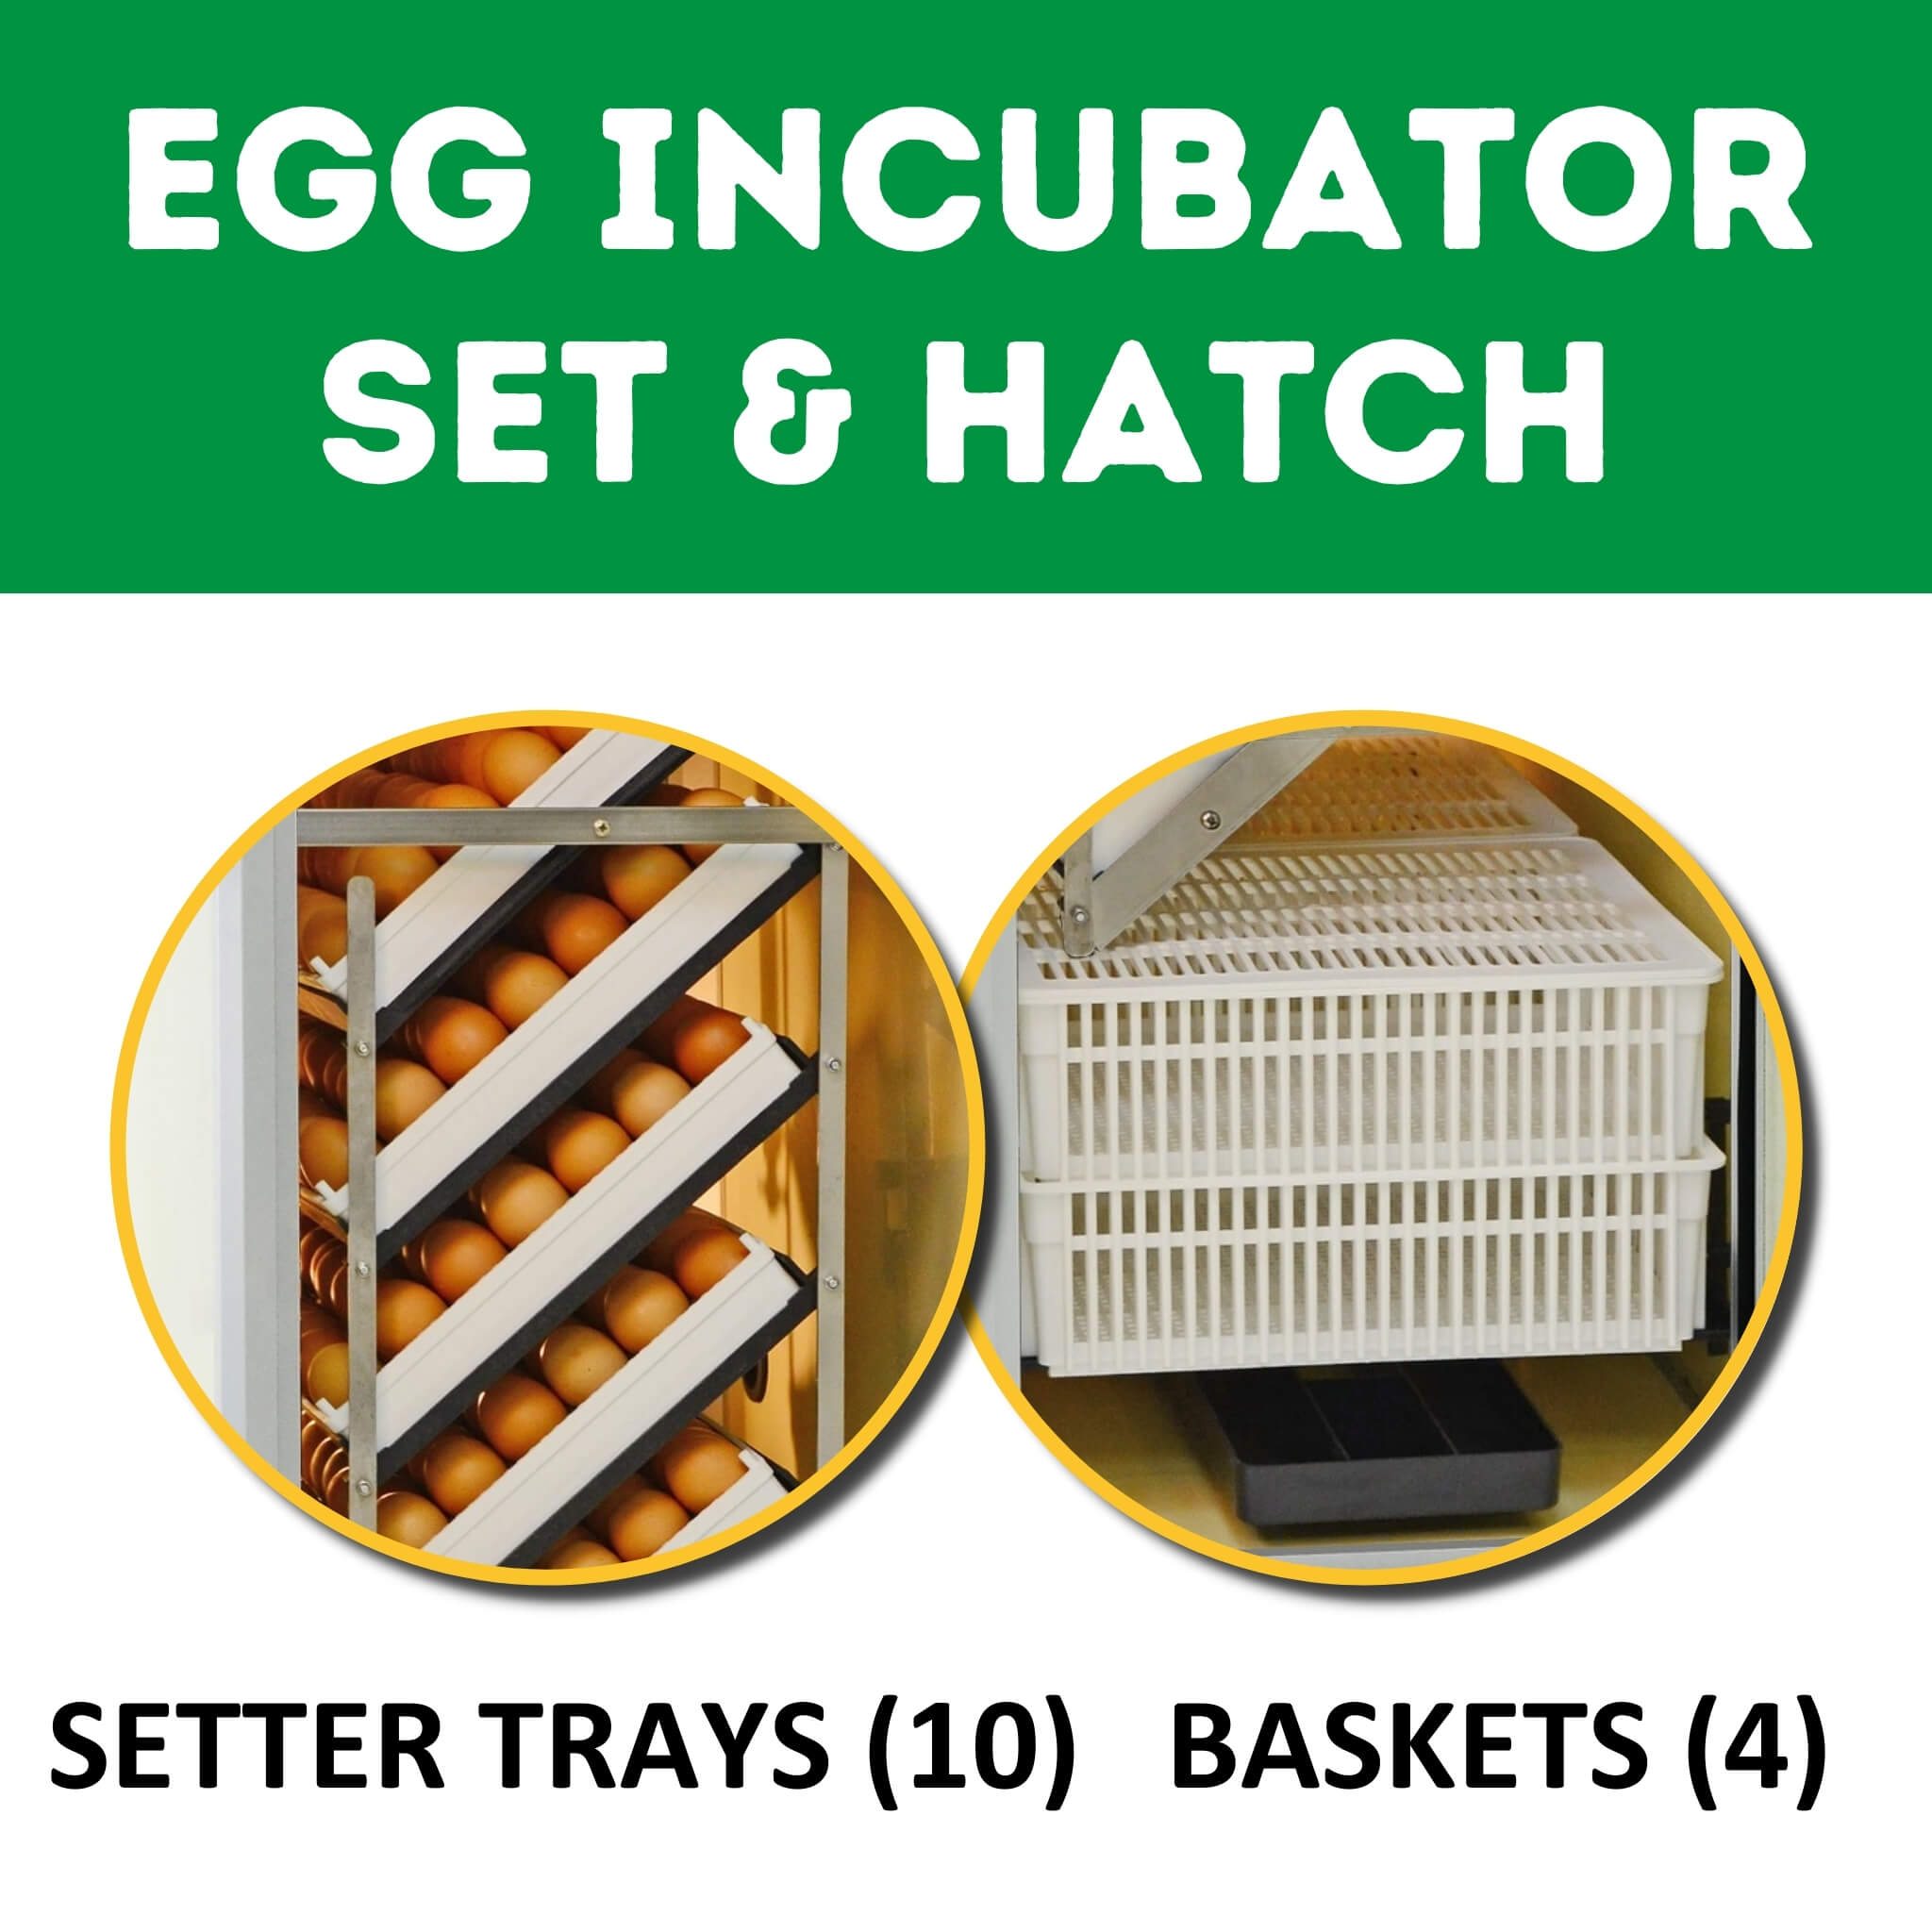 Hatching Time Cimuka. Image showing incubator accessories included which are 10 setter trays and 4 hatching baskets. Text reads Egg Incubator Set & Hatch.